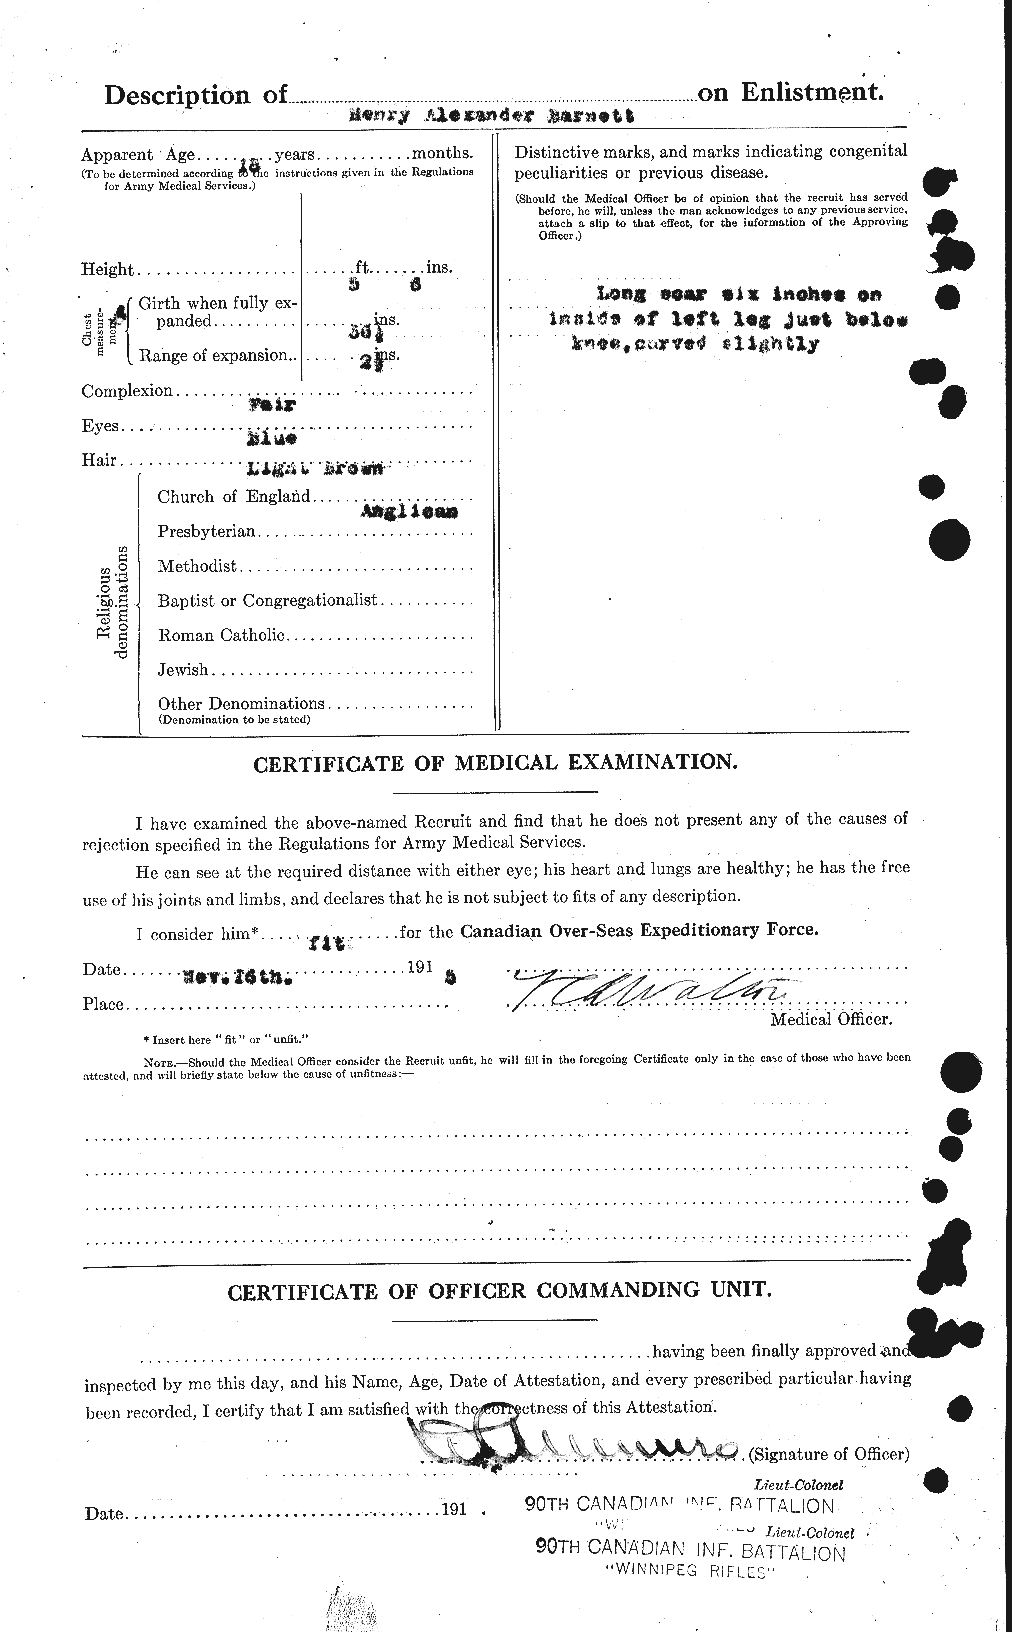 Personnel Records of the First World War - CEF 272107b